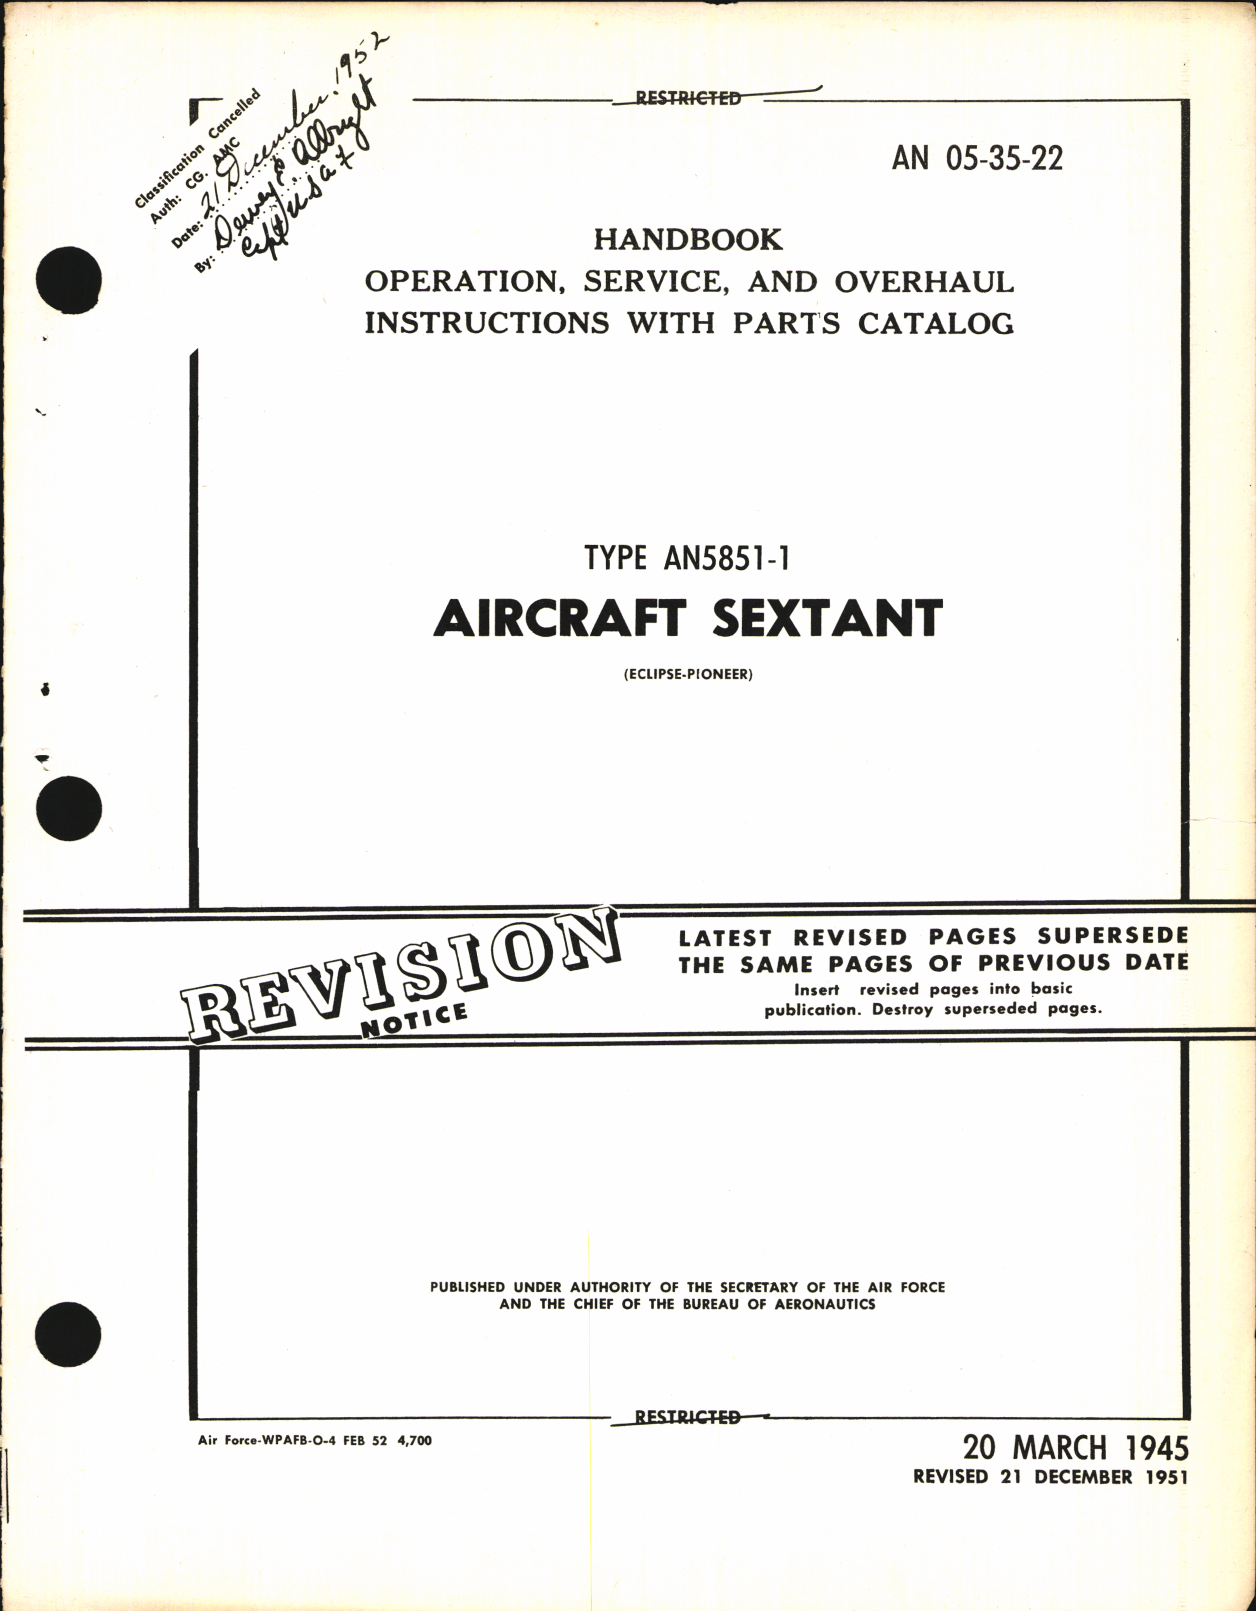 Sample page 1 from AirCorps Library document: Operation, Service, & Overhaul Instructions with Parts Catalog for Type AN5851-1 Aircraft Sextant